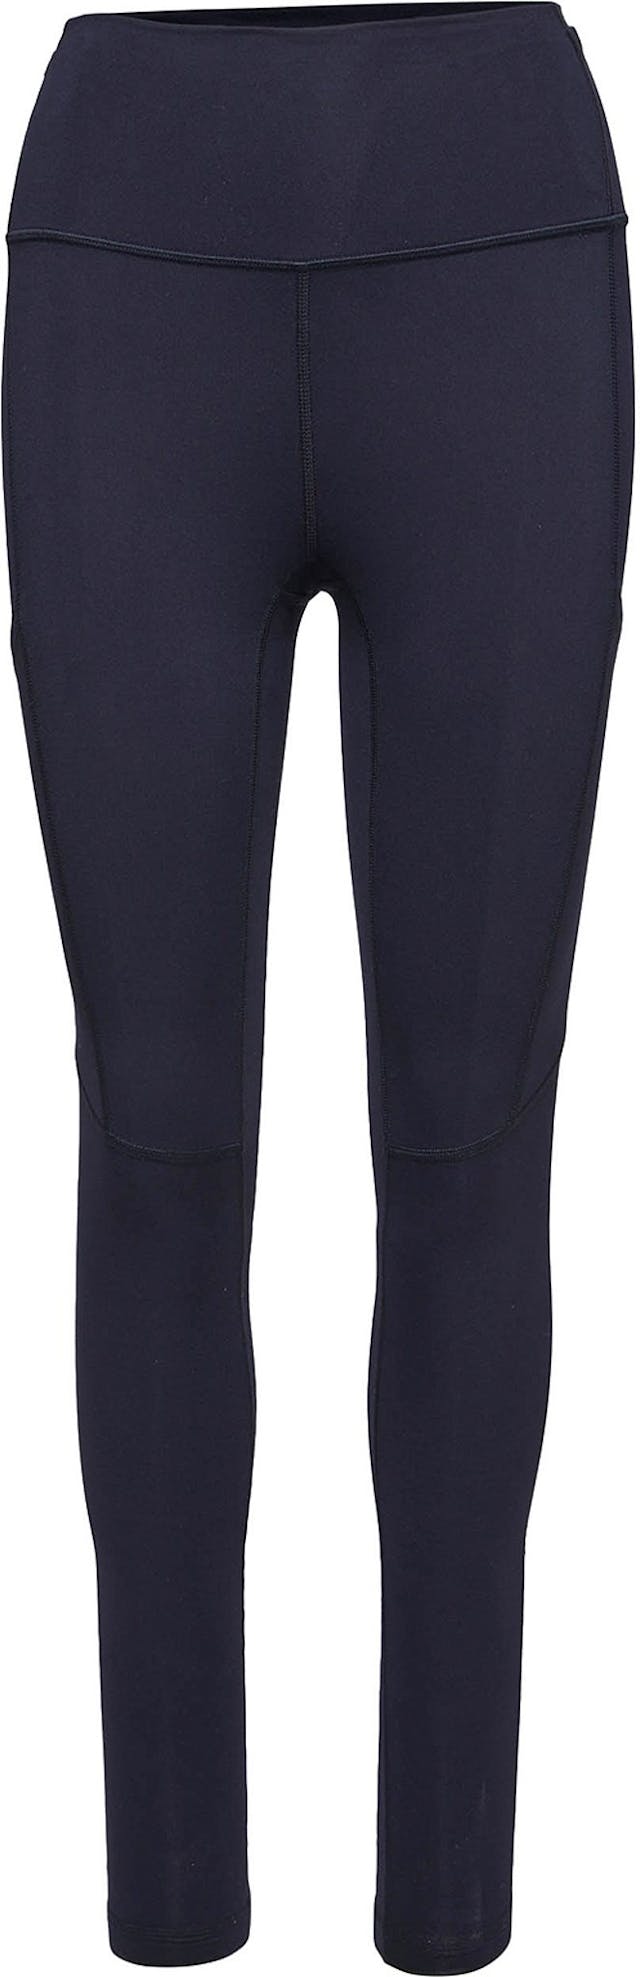 Product image for Sanford High Rise Tights - Women's